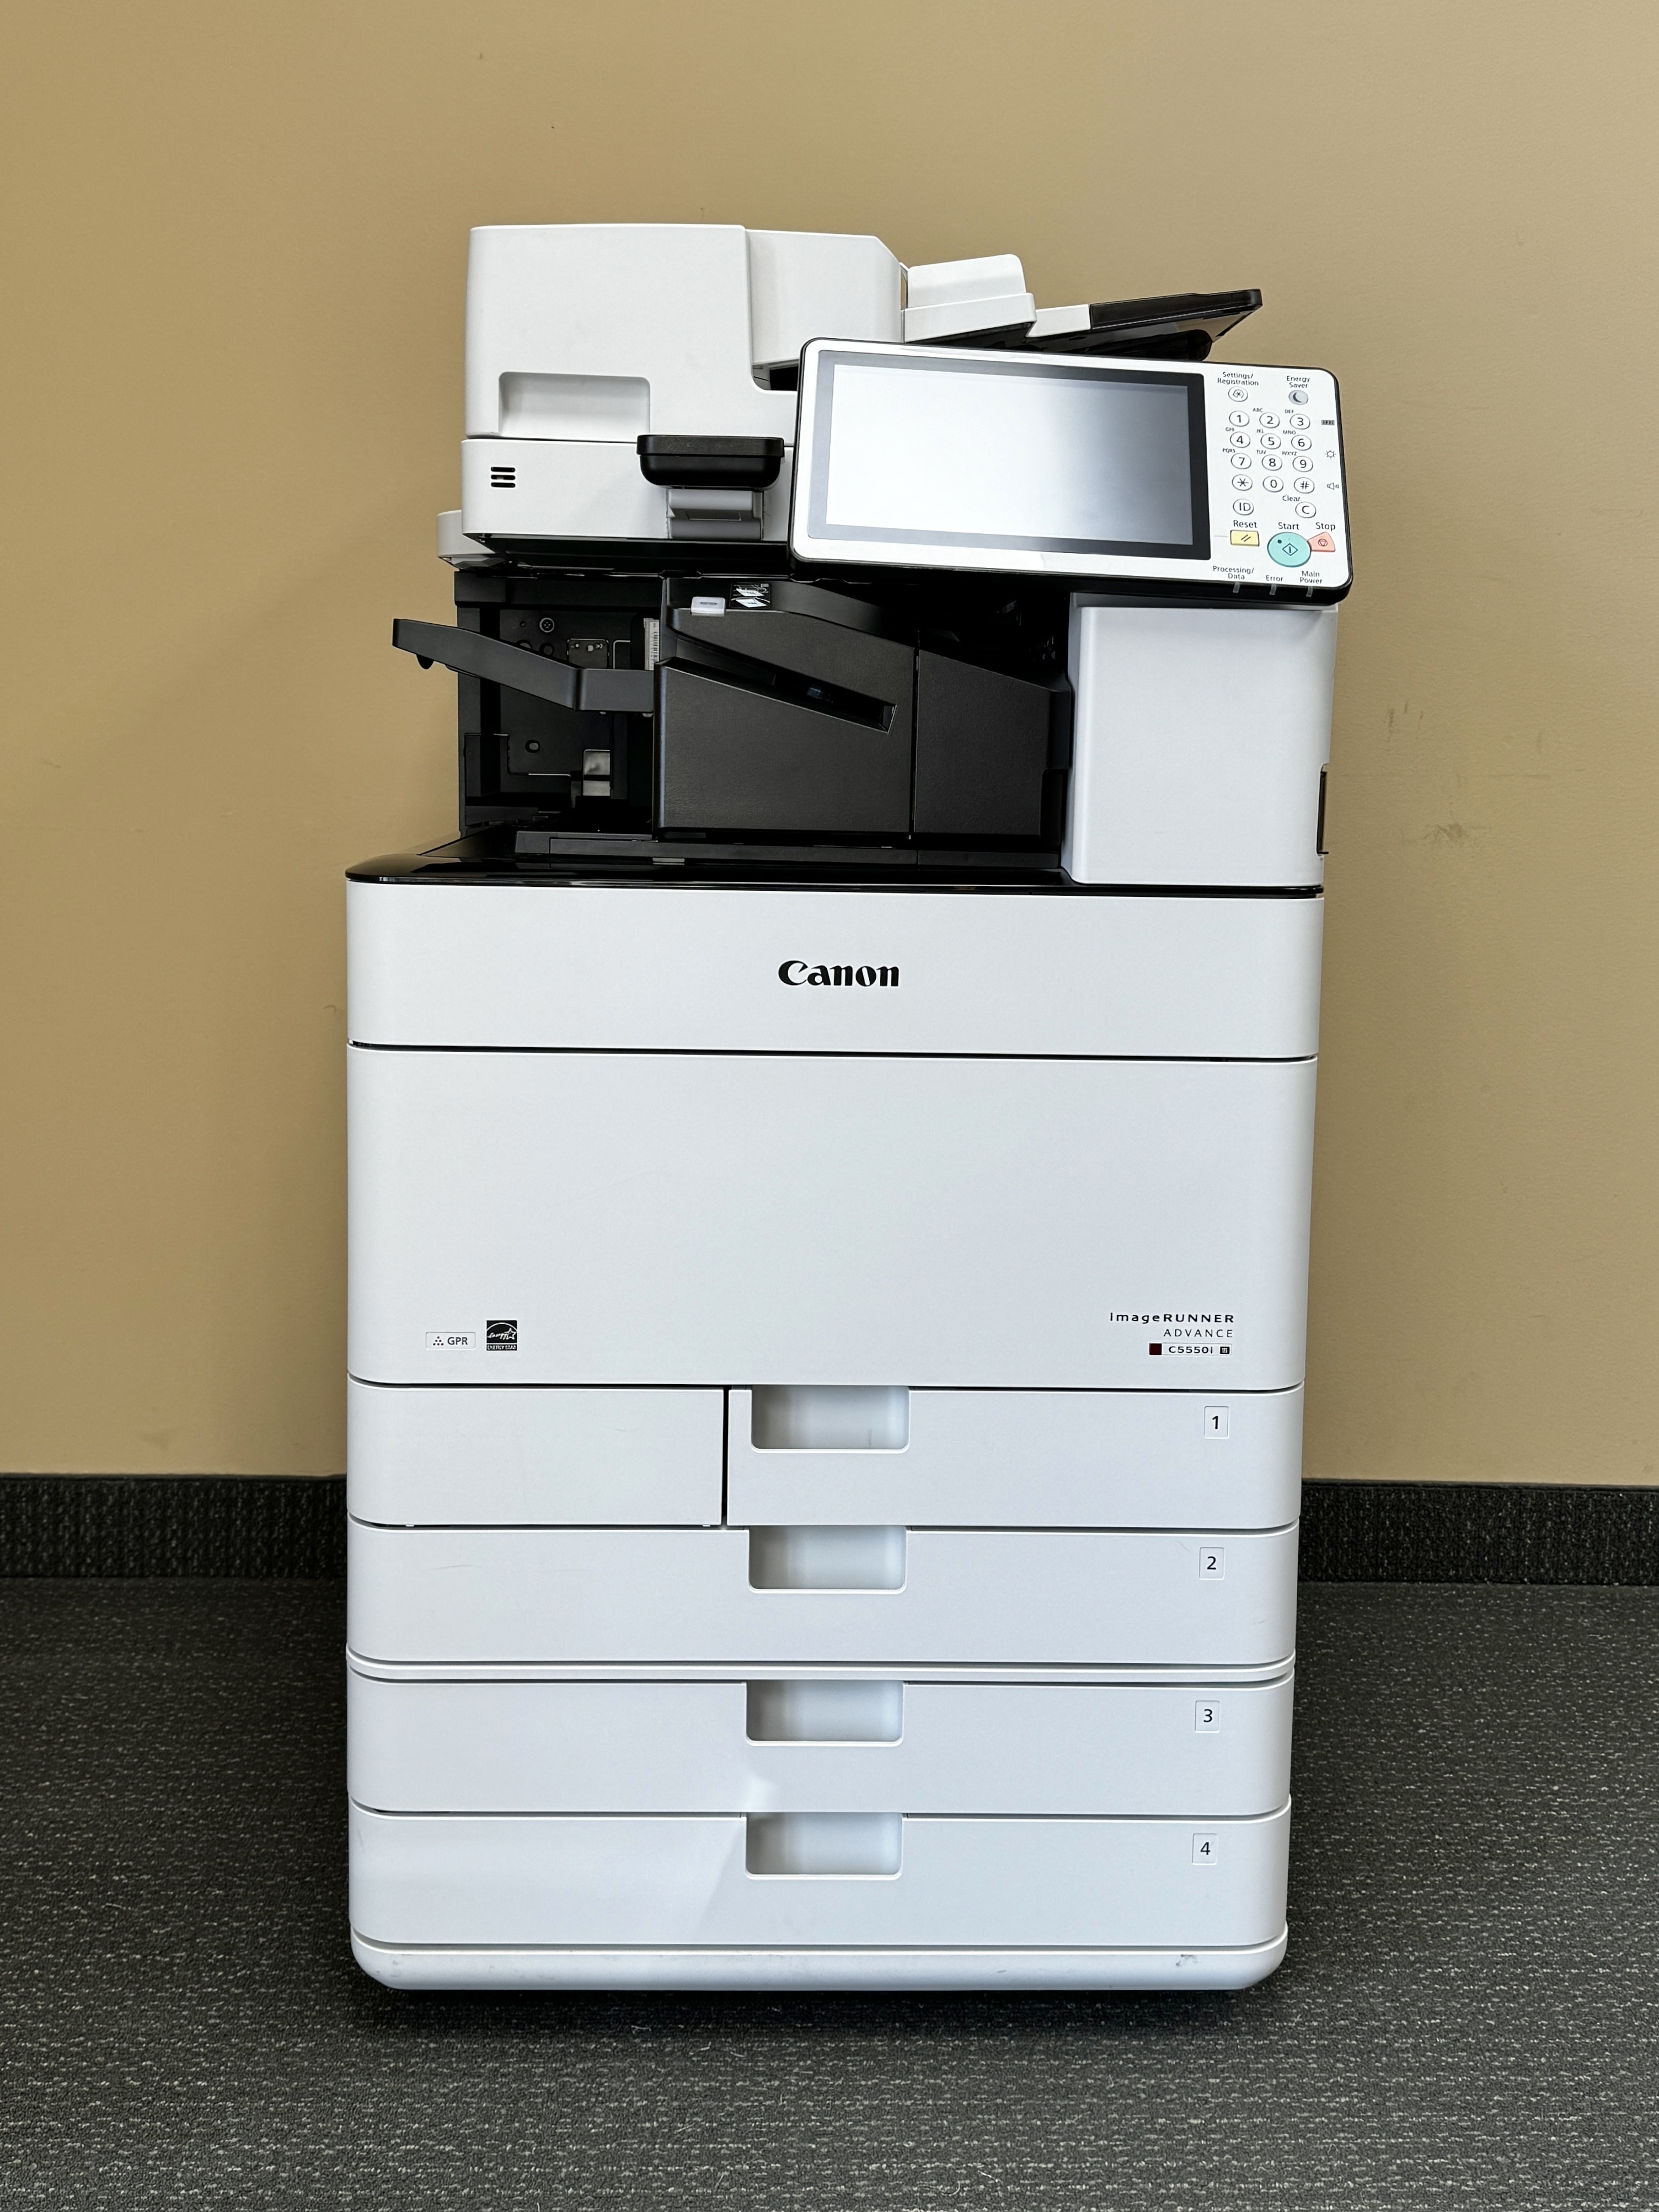 Canon Imagerunner Advance C5550ii color printer leasing. 